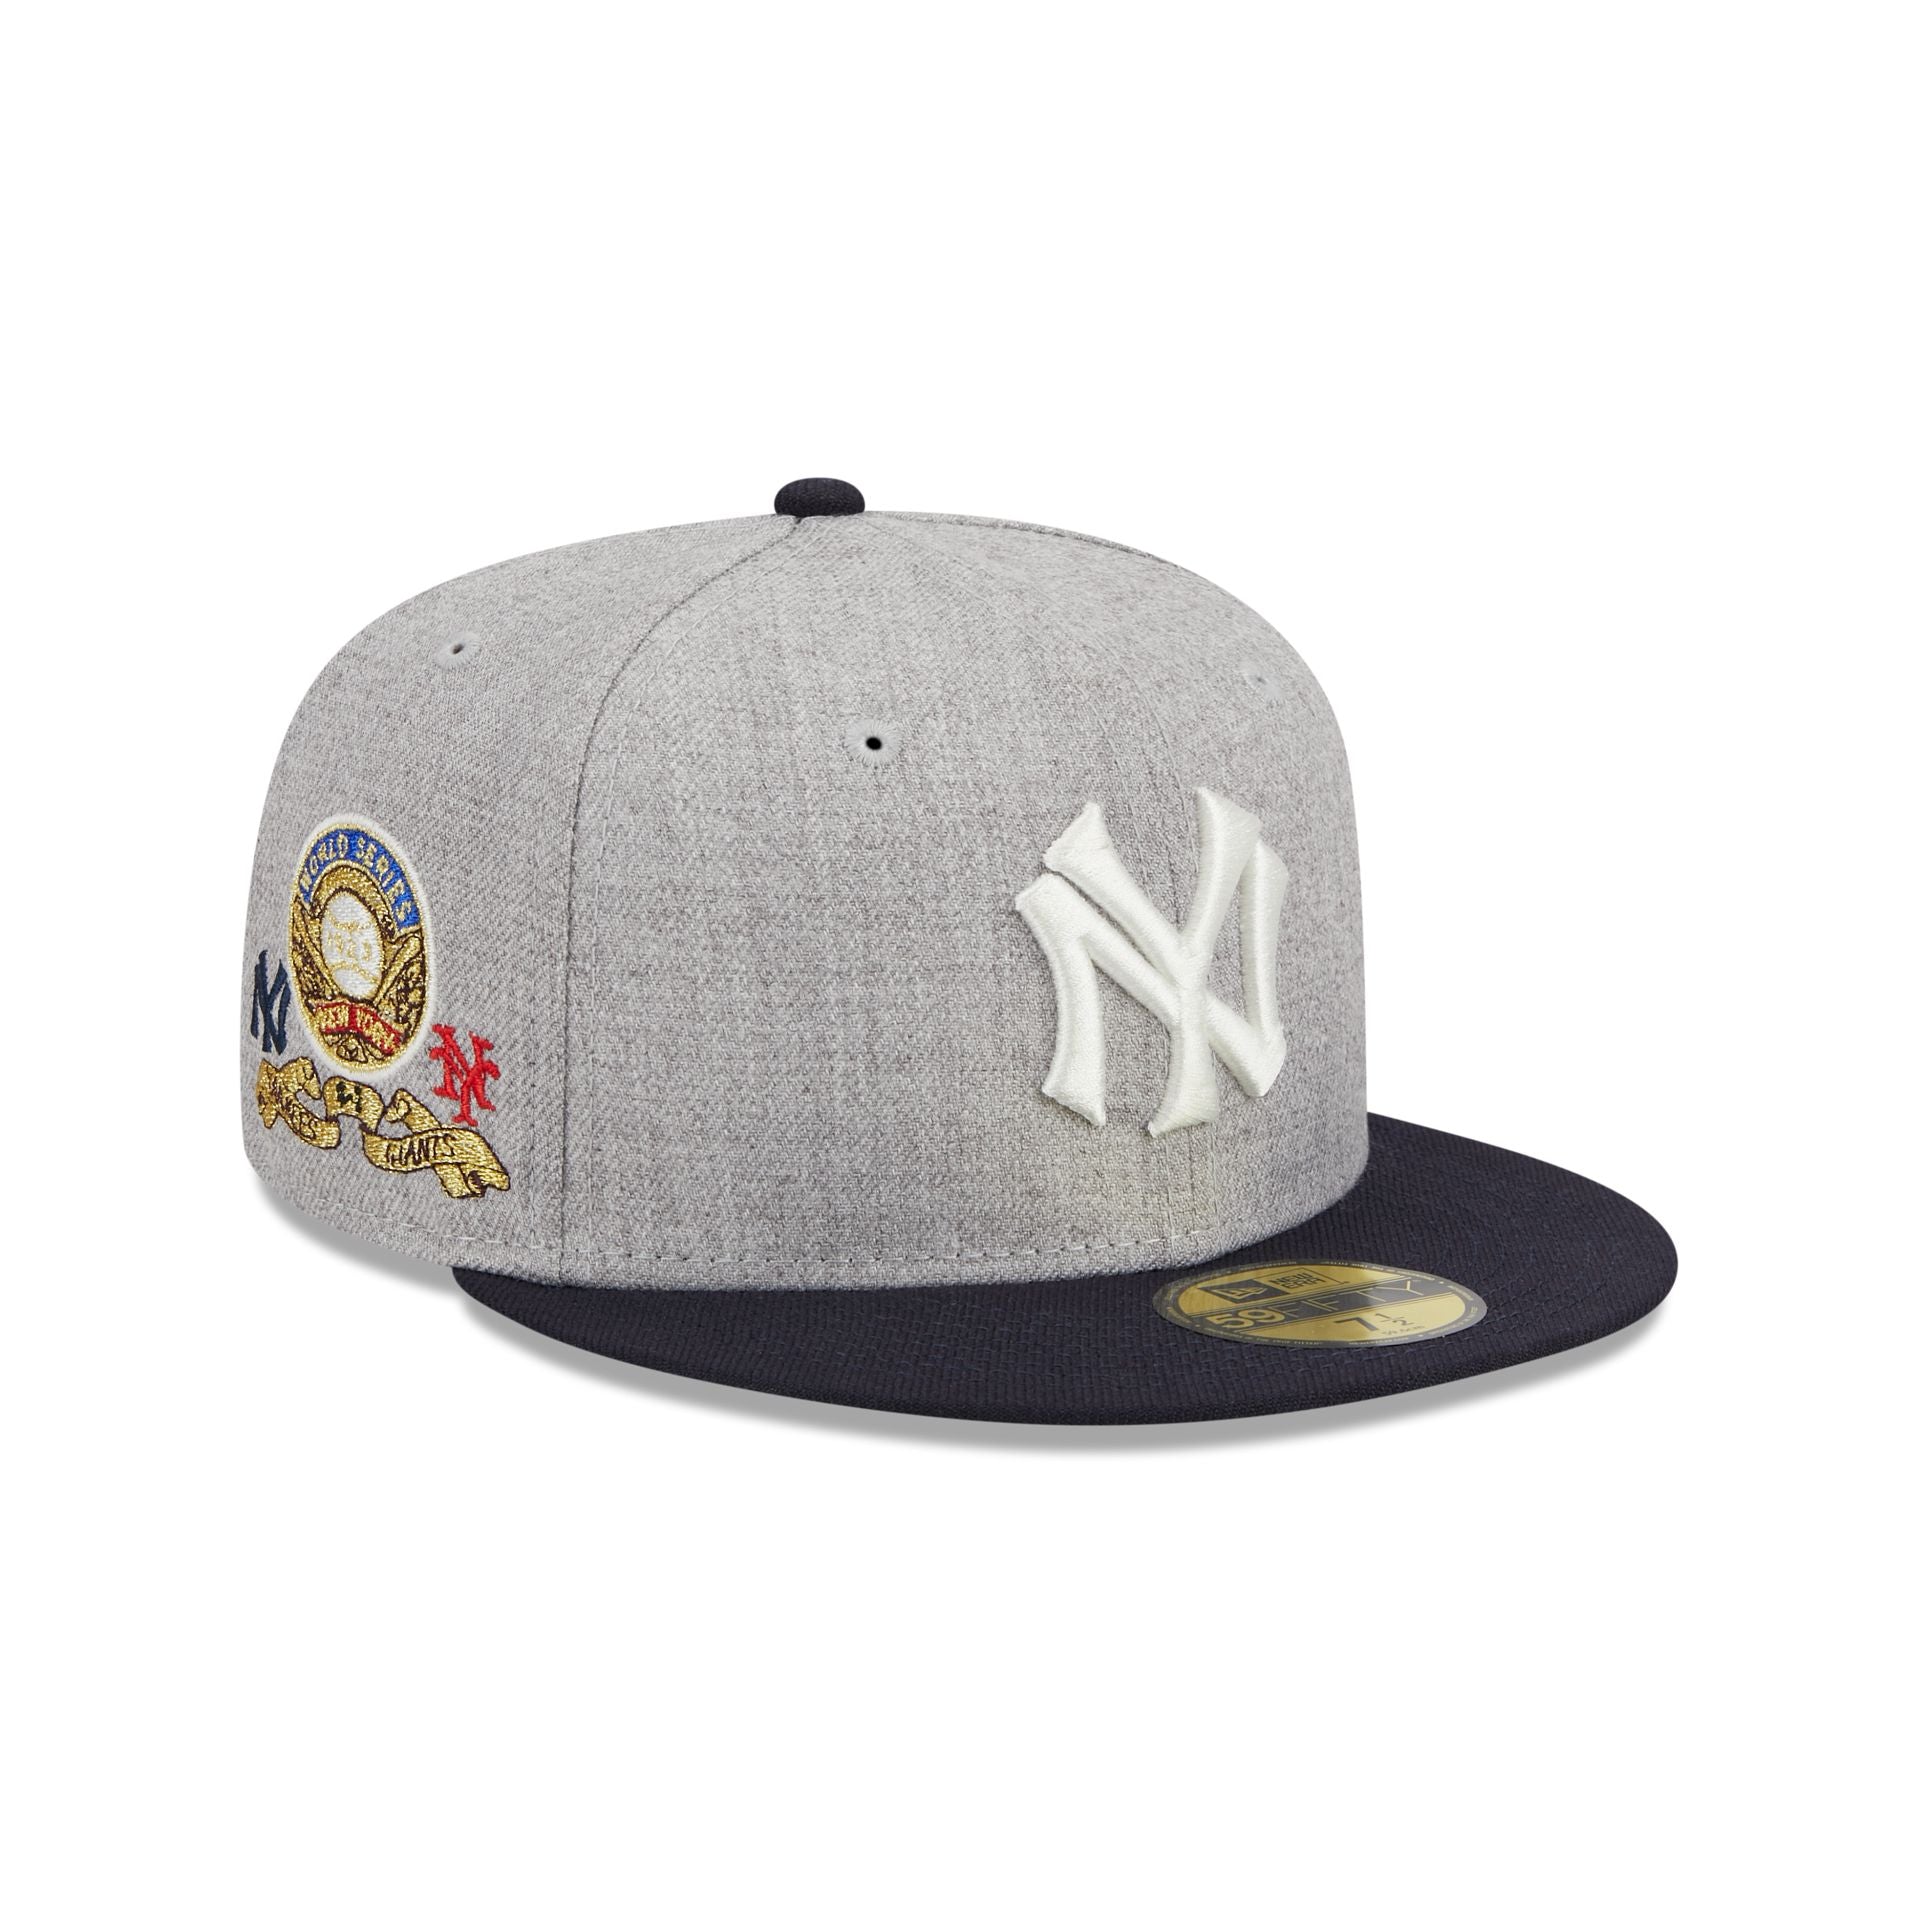 New York Yankees Dynasty 59FIFTY Fitted Hat – New Era Cap